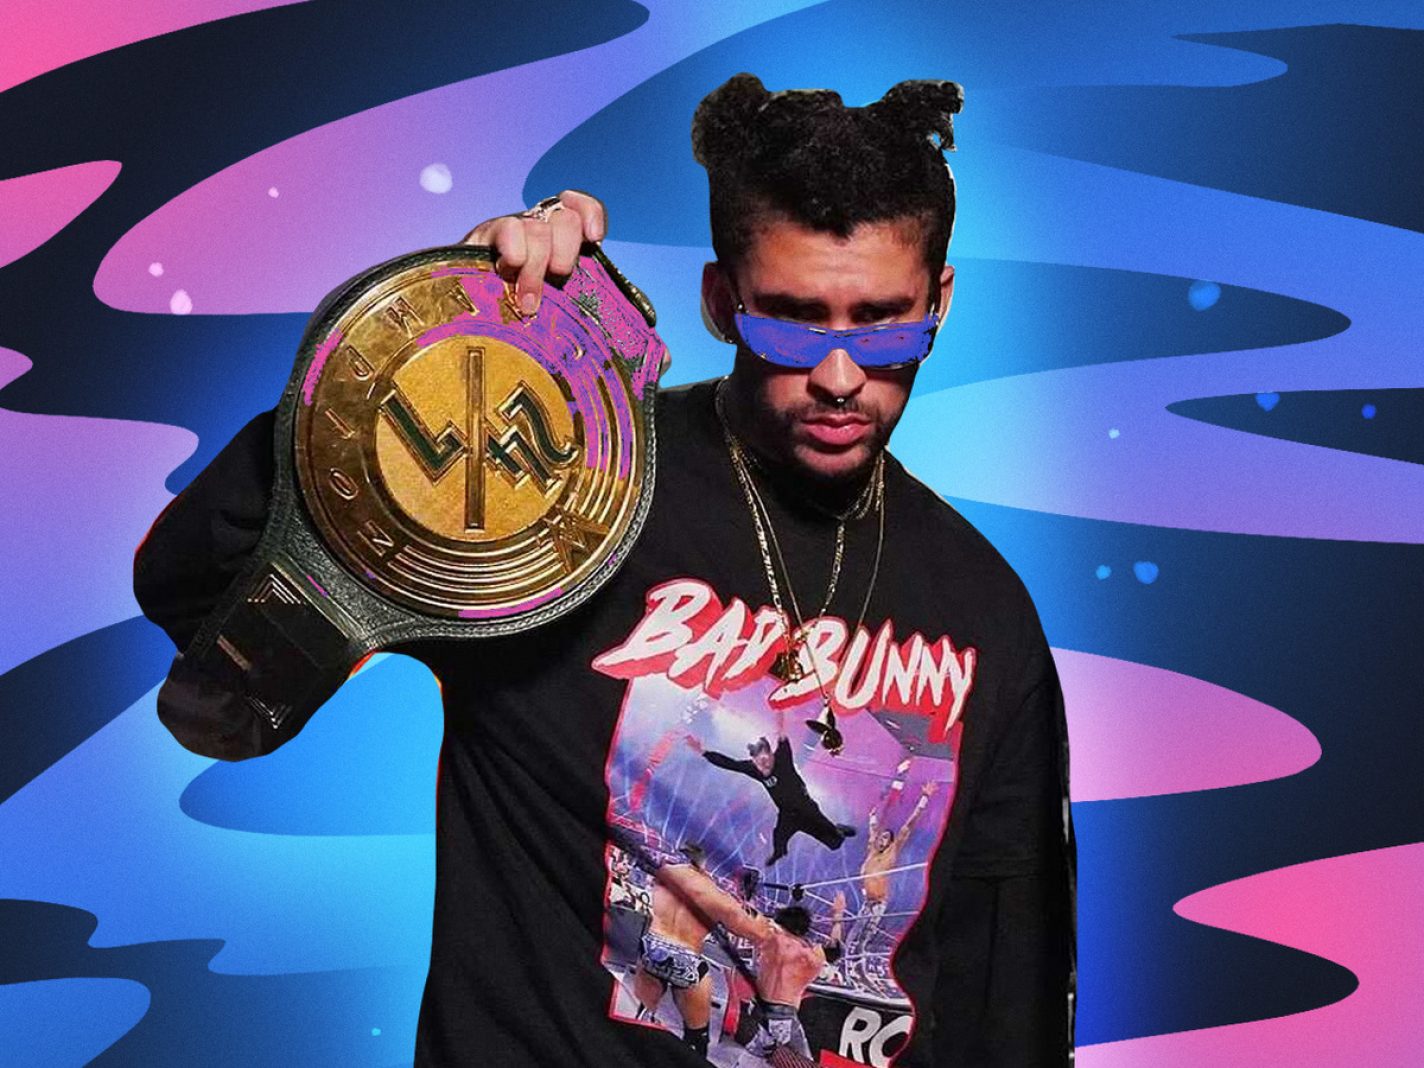 Puerto Rican Rapper Bad Bunny Wins 24 7 Championship Belt During Wwe Raw